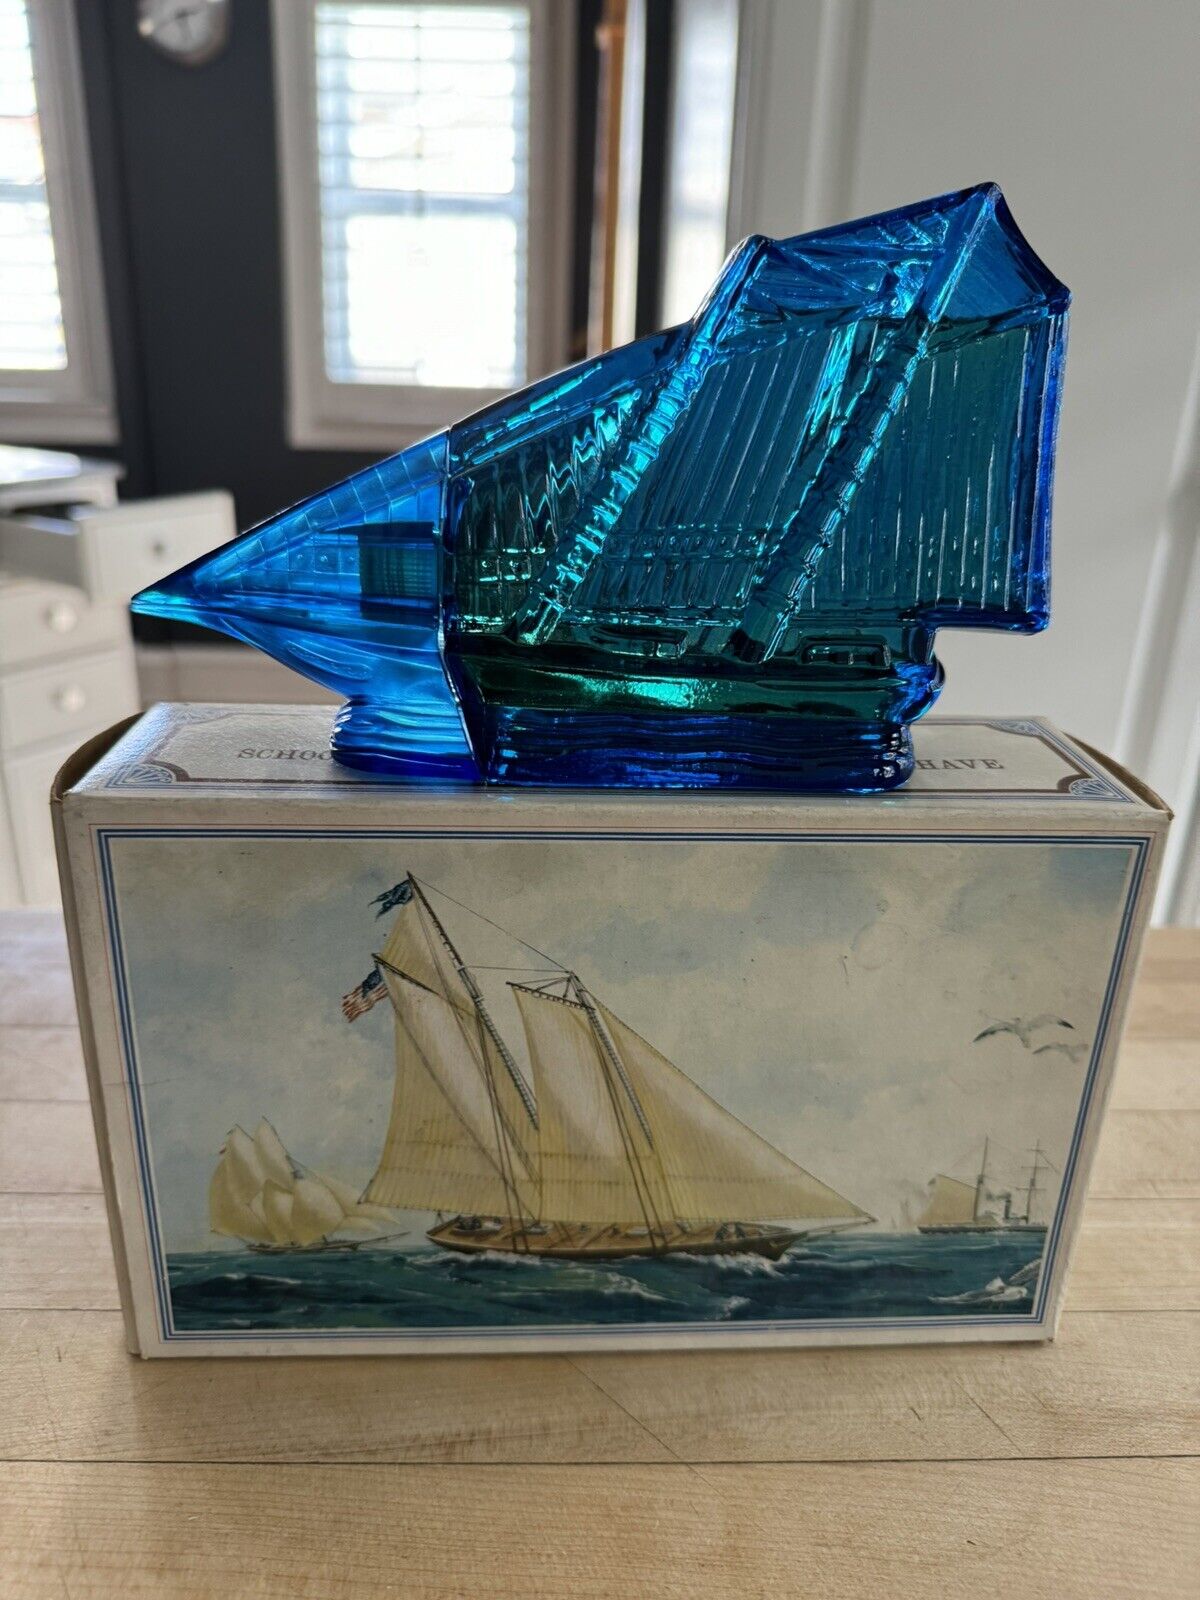 Rare Vintage Avon, Americas Cup Schooner Bottle Boxed Spicy Aftershave Ship Boat